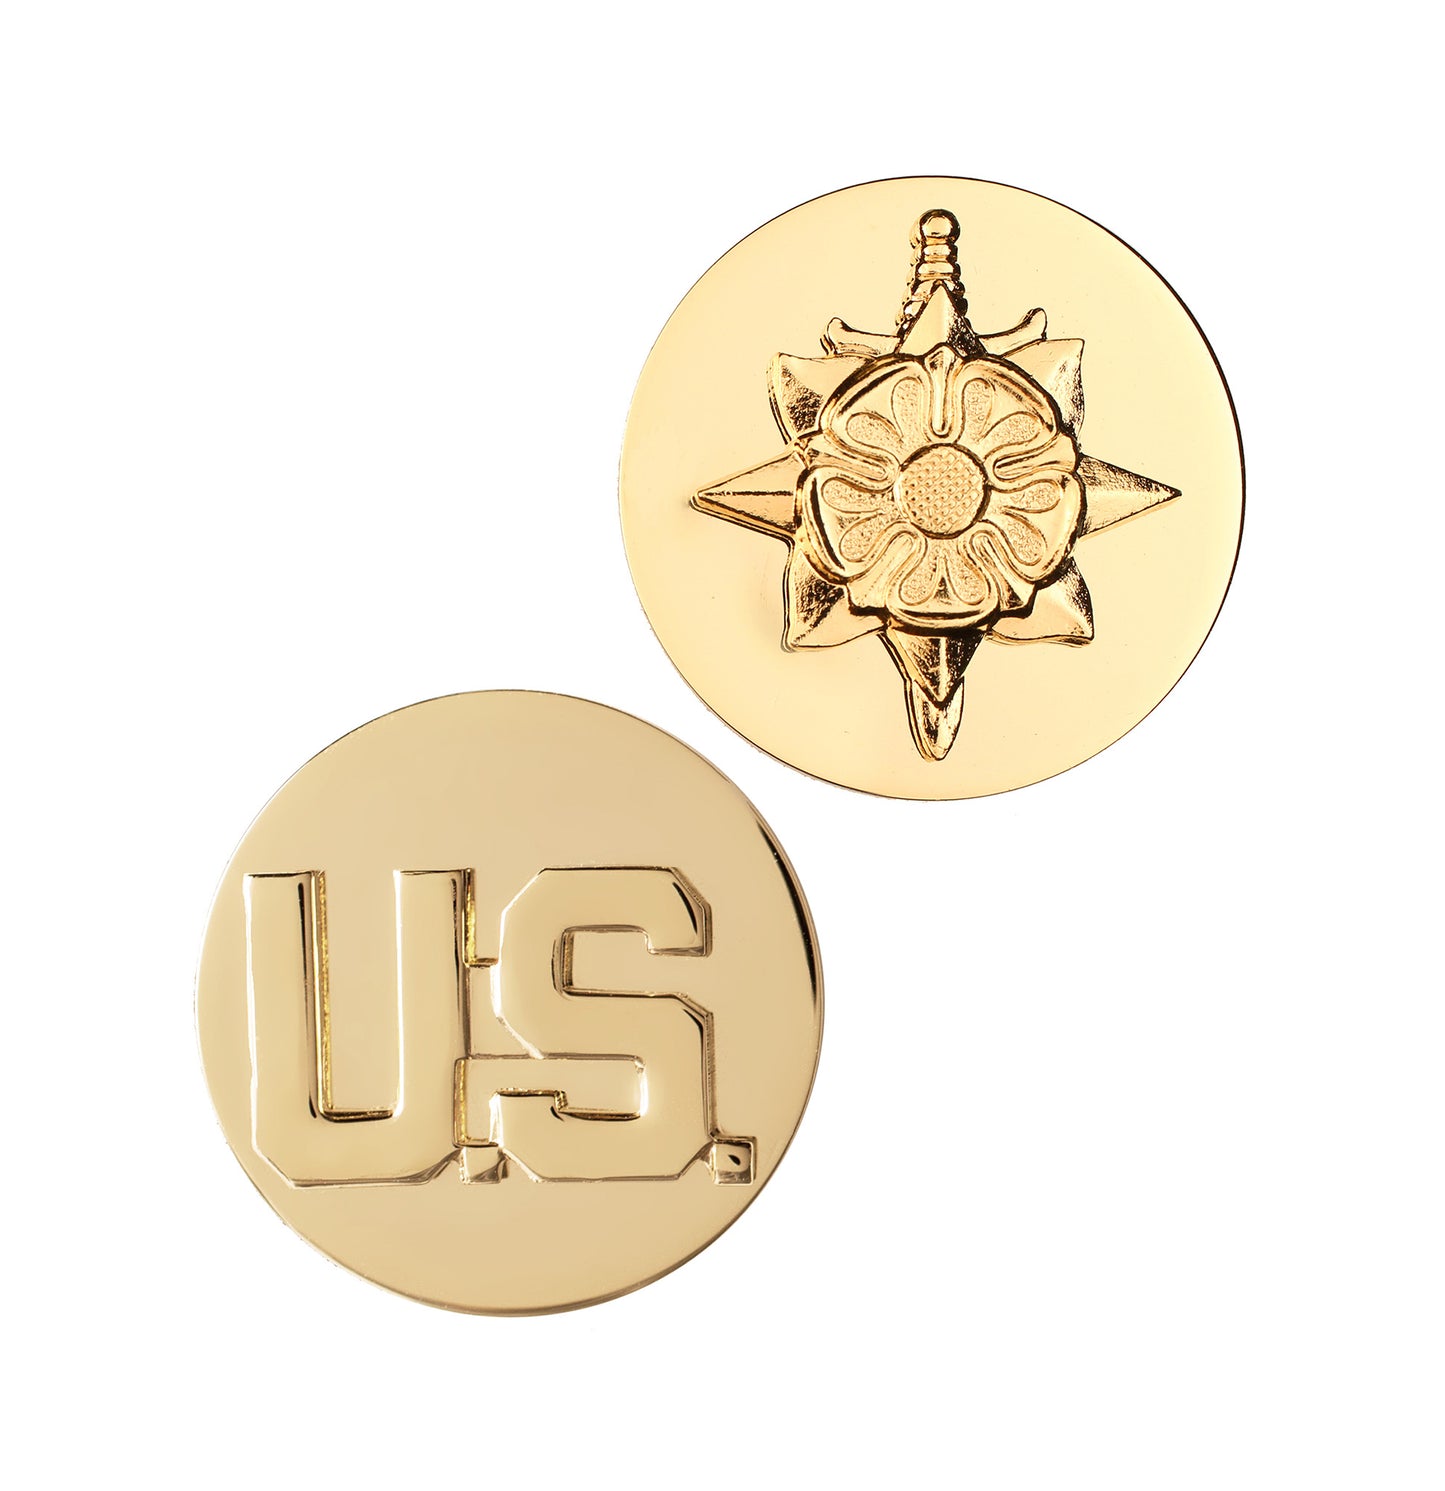 U.S. Army Enlisted Military Intelligence & U.S. Sta-Brite Pin-on